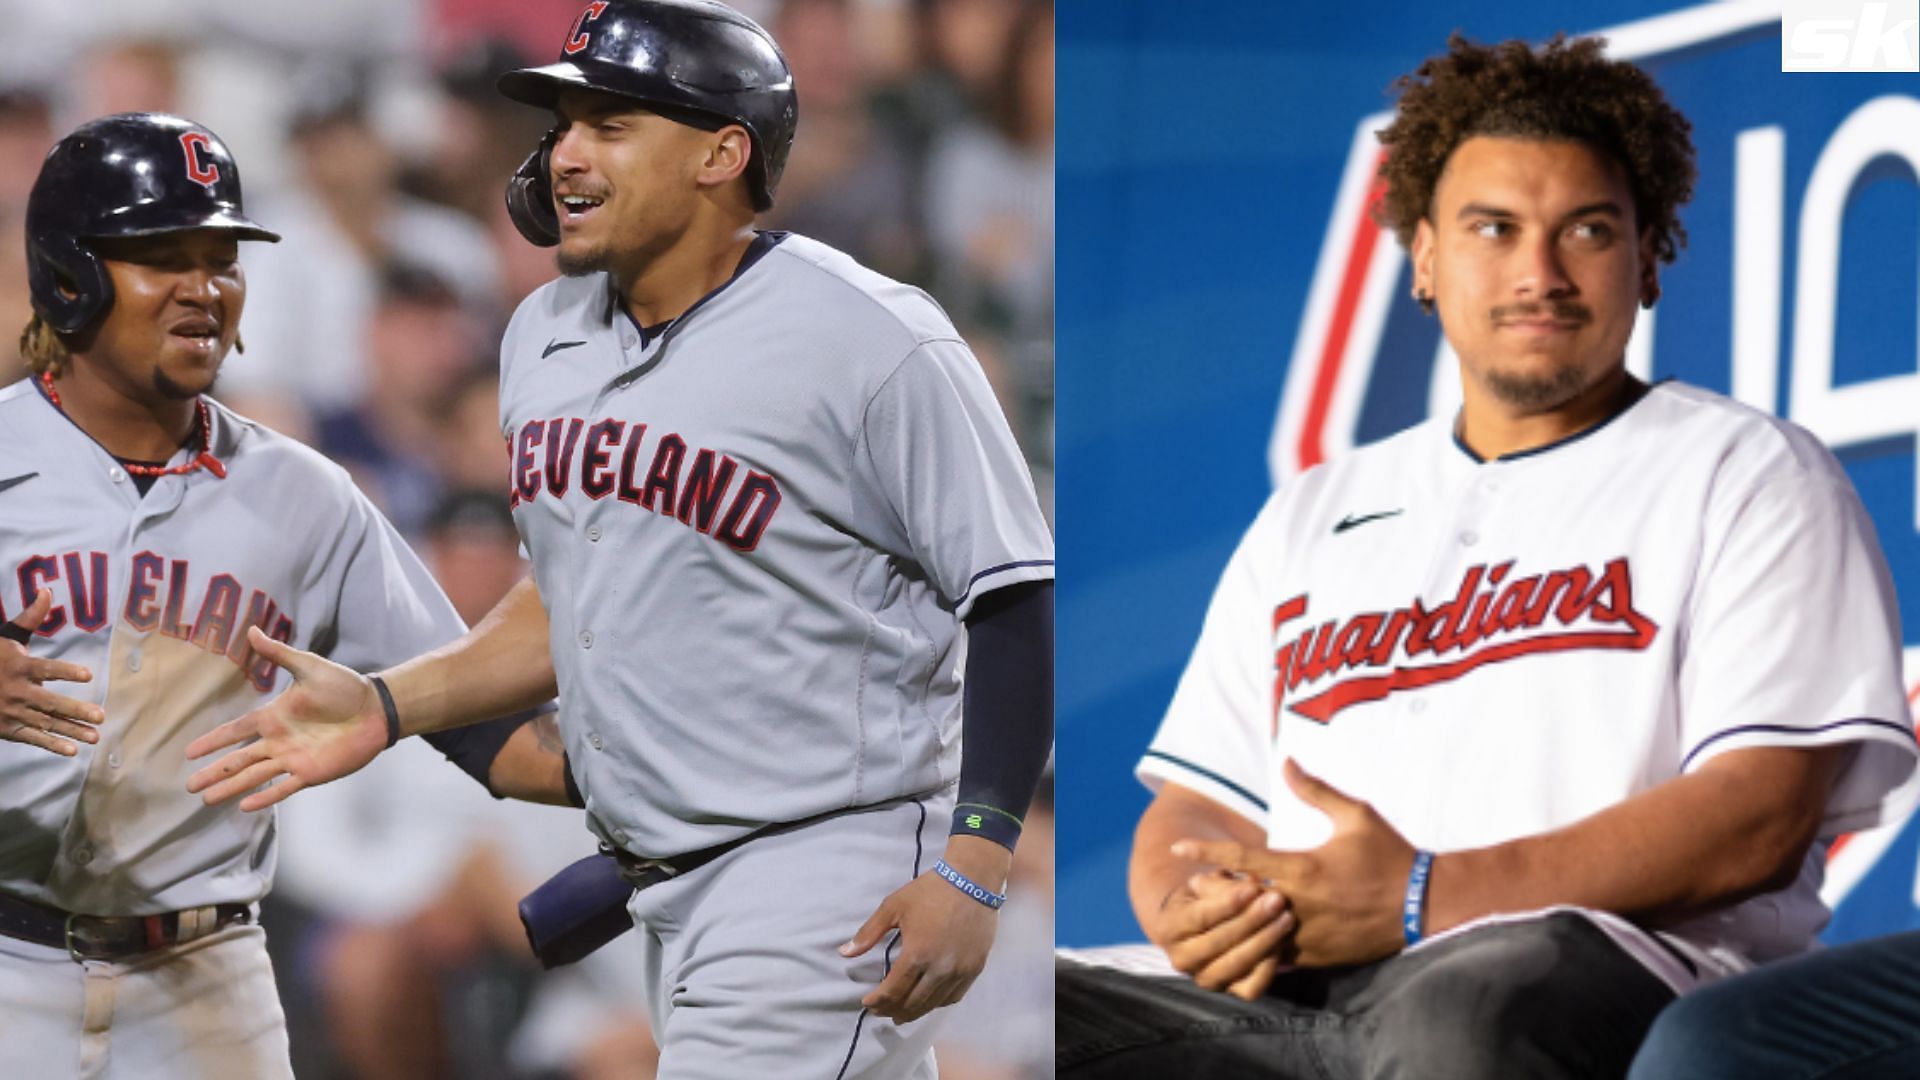 Fact check: Is Guardians Star Josh Naylor related to teammate